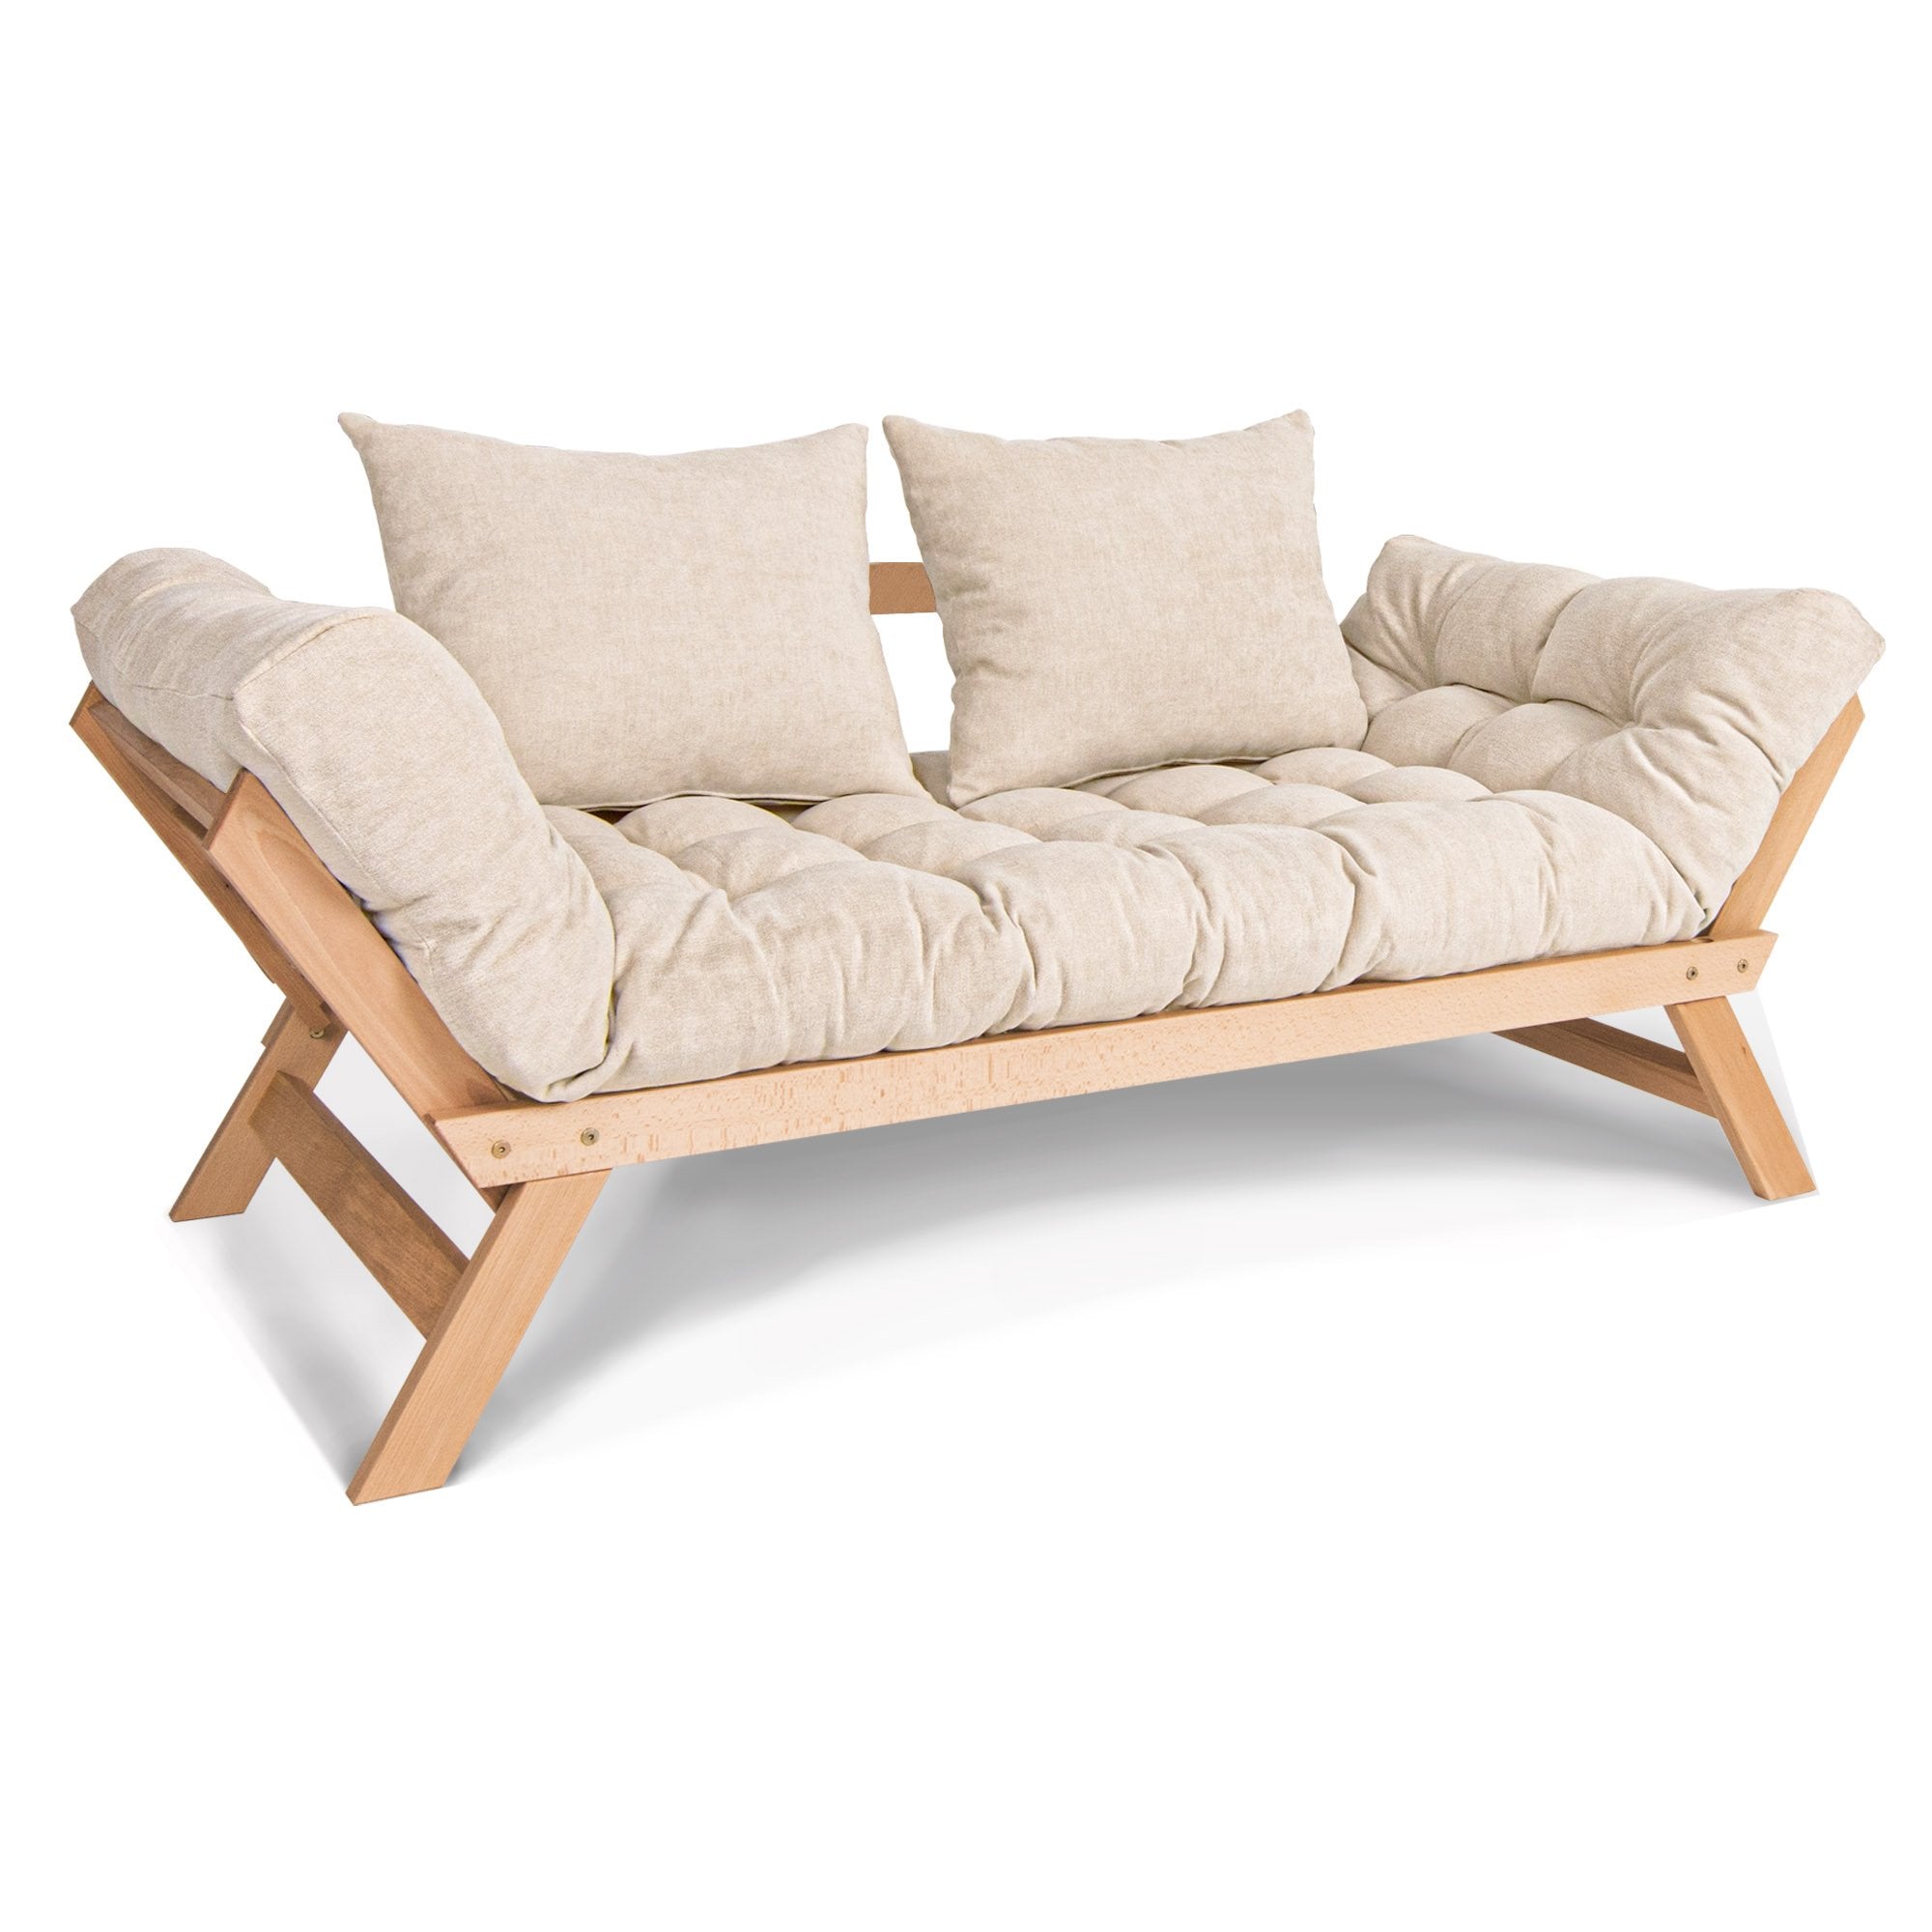 Sofa bed Allegro natural color beech wood frame and cream mattress